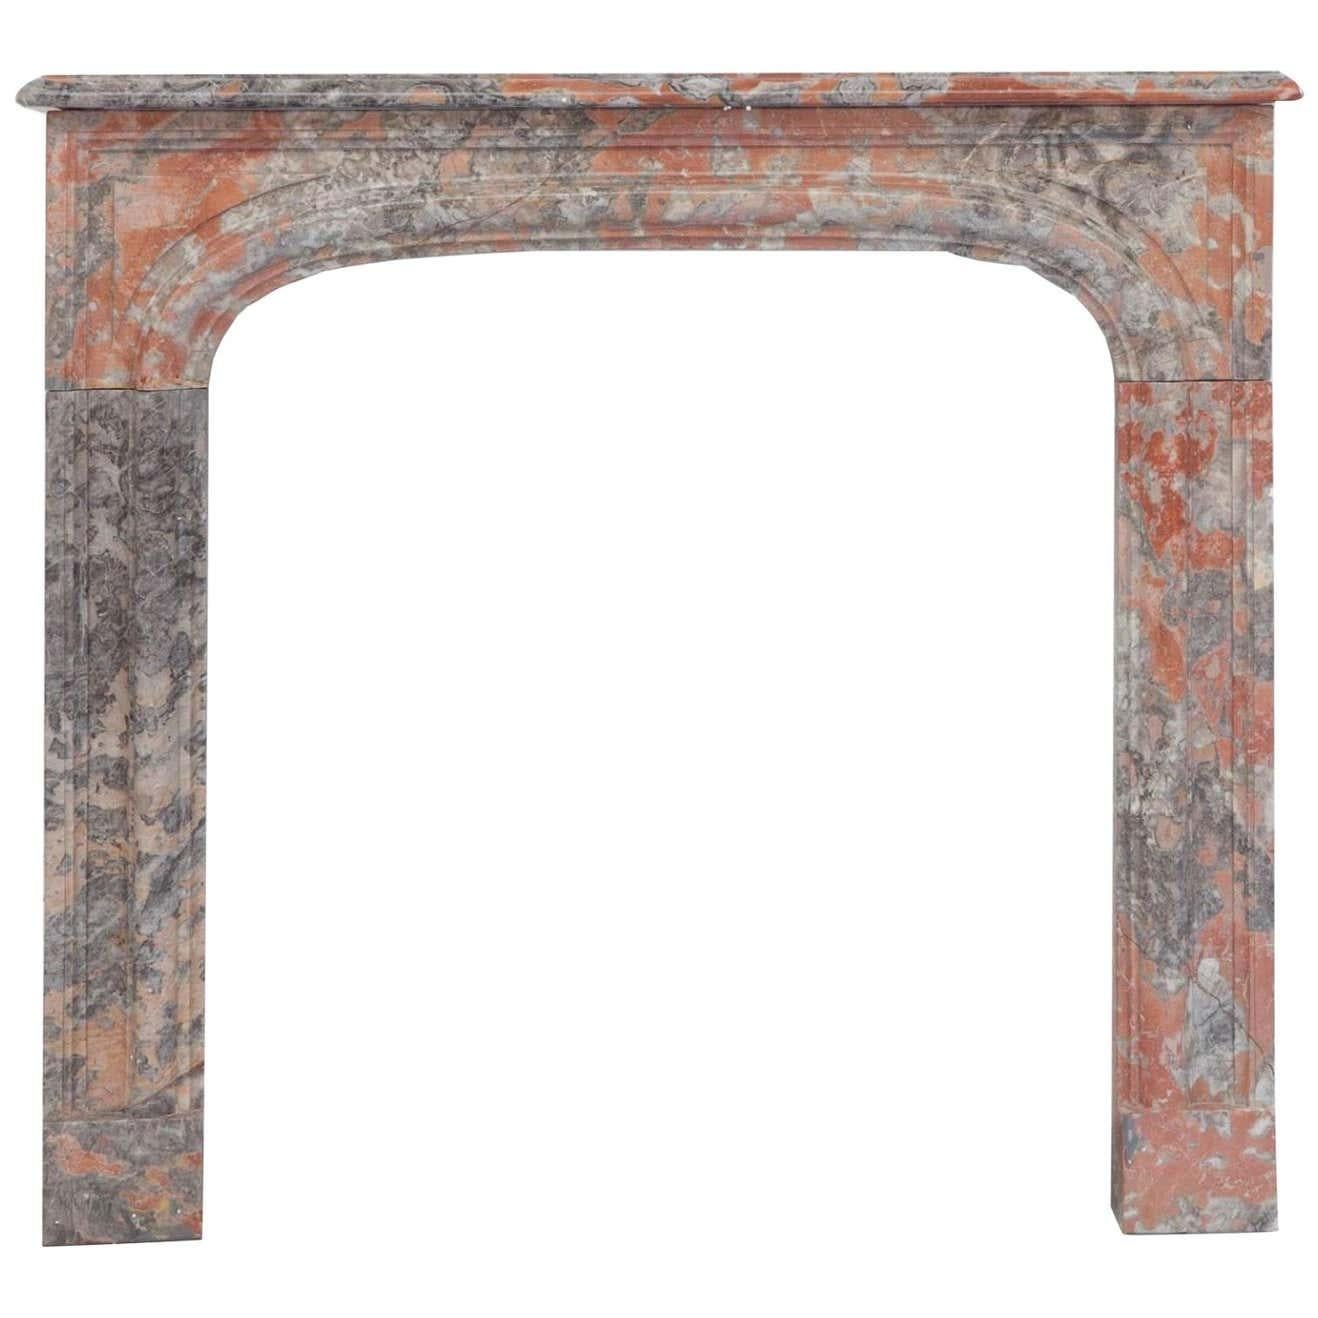 Are 19th century antique French Louis Phillipe marble fireplace mantel. Hand carved in unusual rouge grey Italian marble. Simple with recessed jambs and frieze with elegantly moulded shelf detail. Full measurements: Shelf width 44